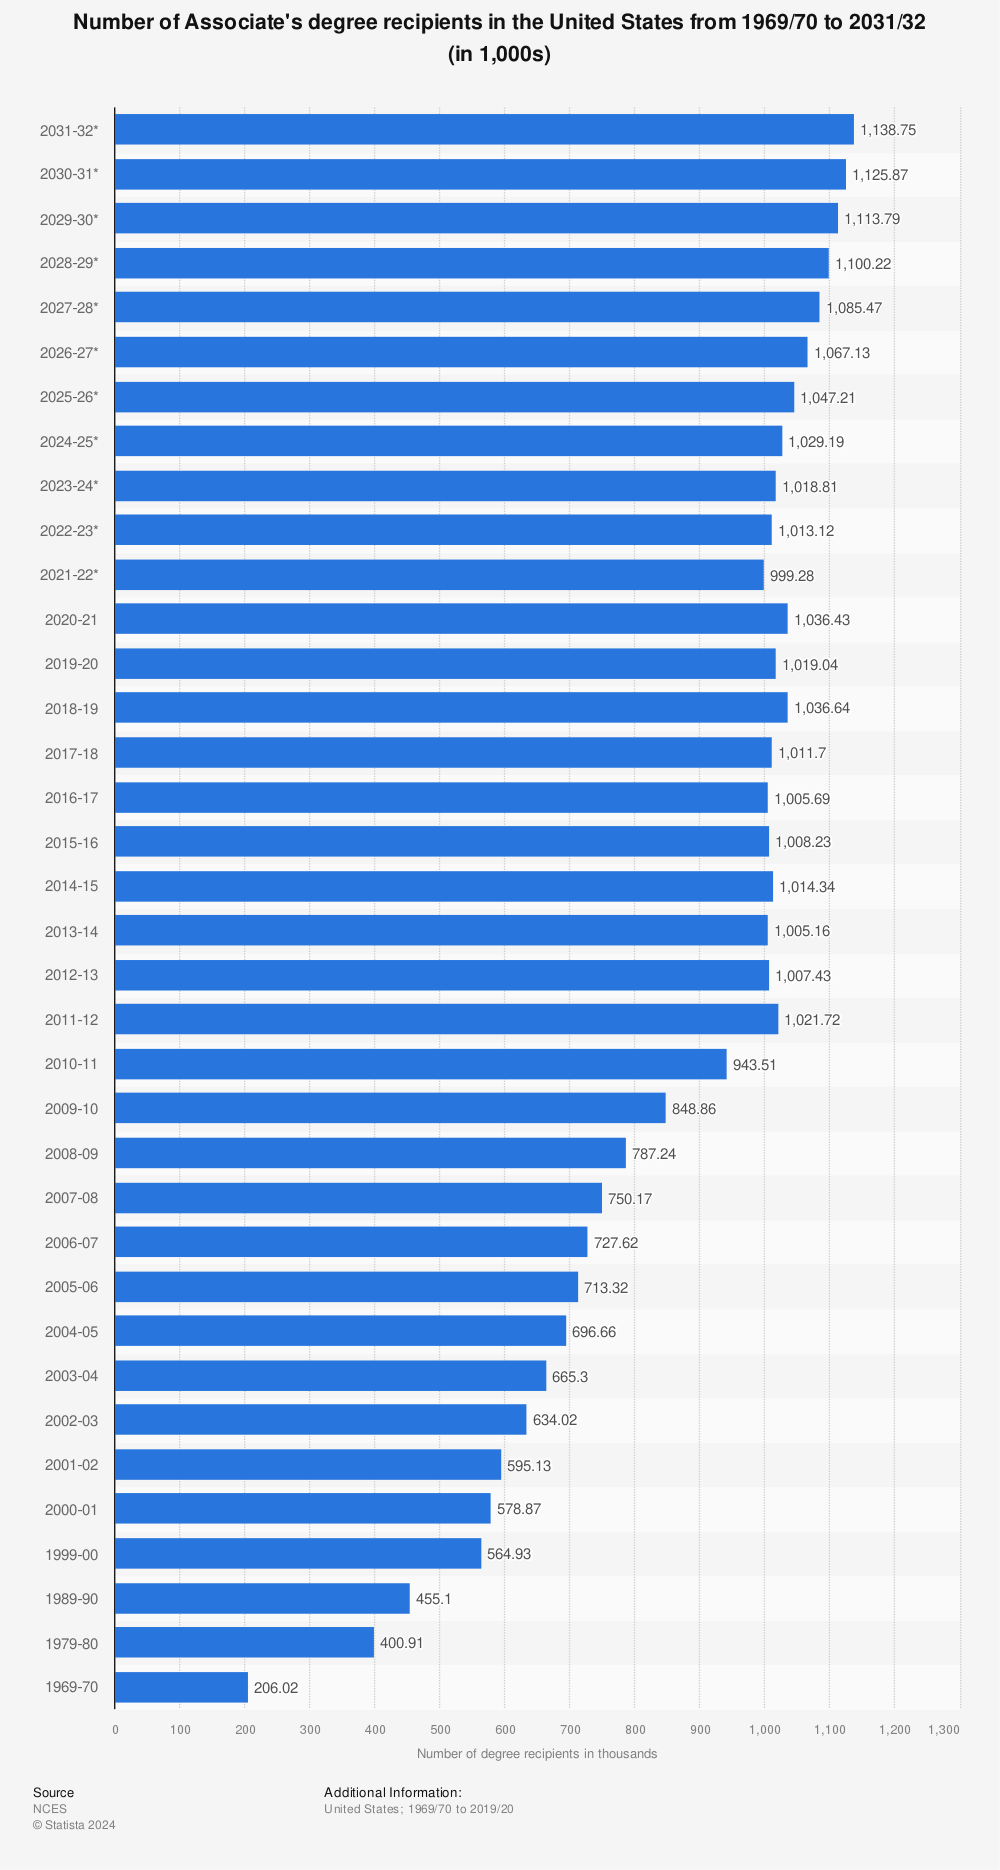 Statistic: Number of Associate's degree recipients in the United States from 1969/70 to 2030/31 (in 1,000s) | Statista